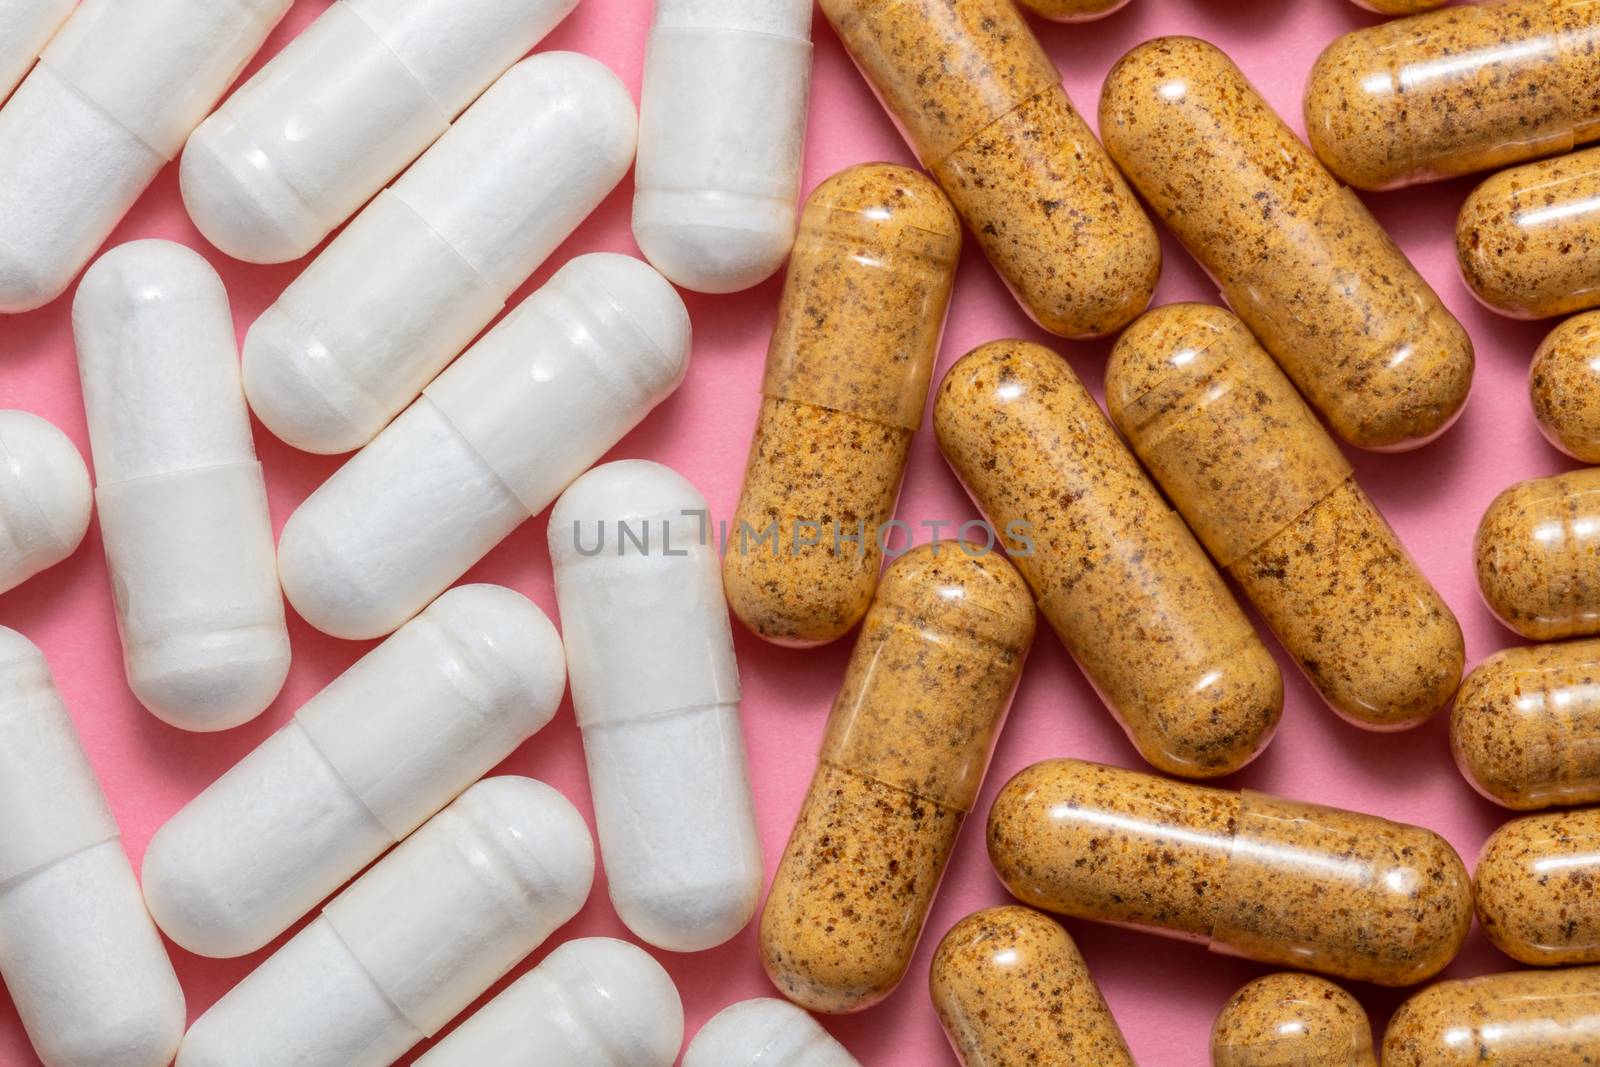 Top close up shot of white and brown pills on pink background. Healthcare, medical and pharmaceutical concept.